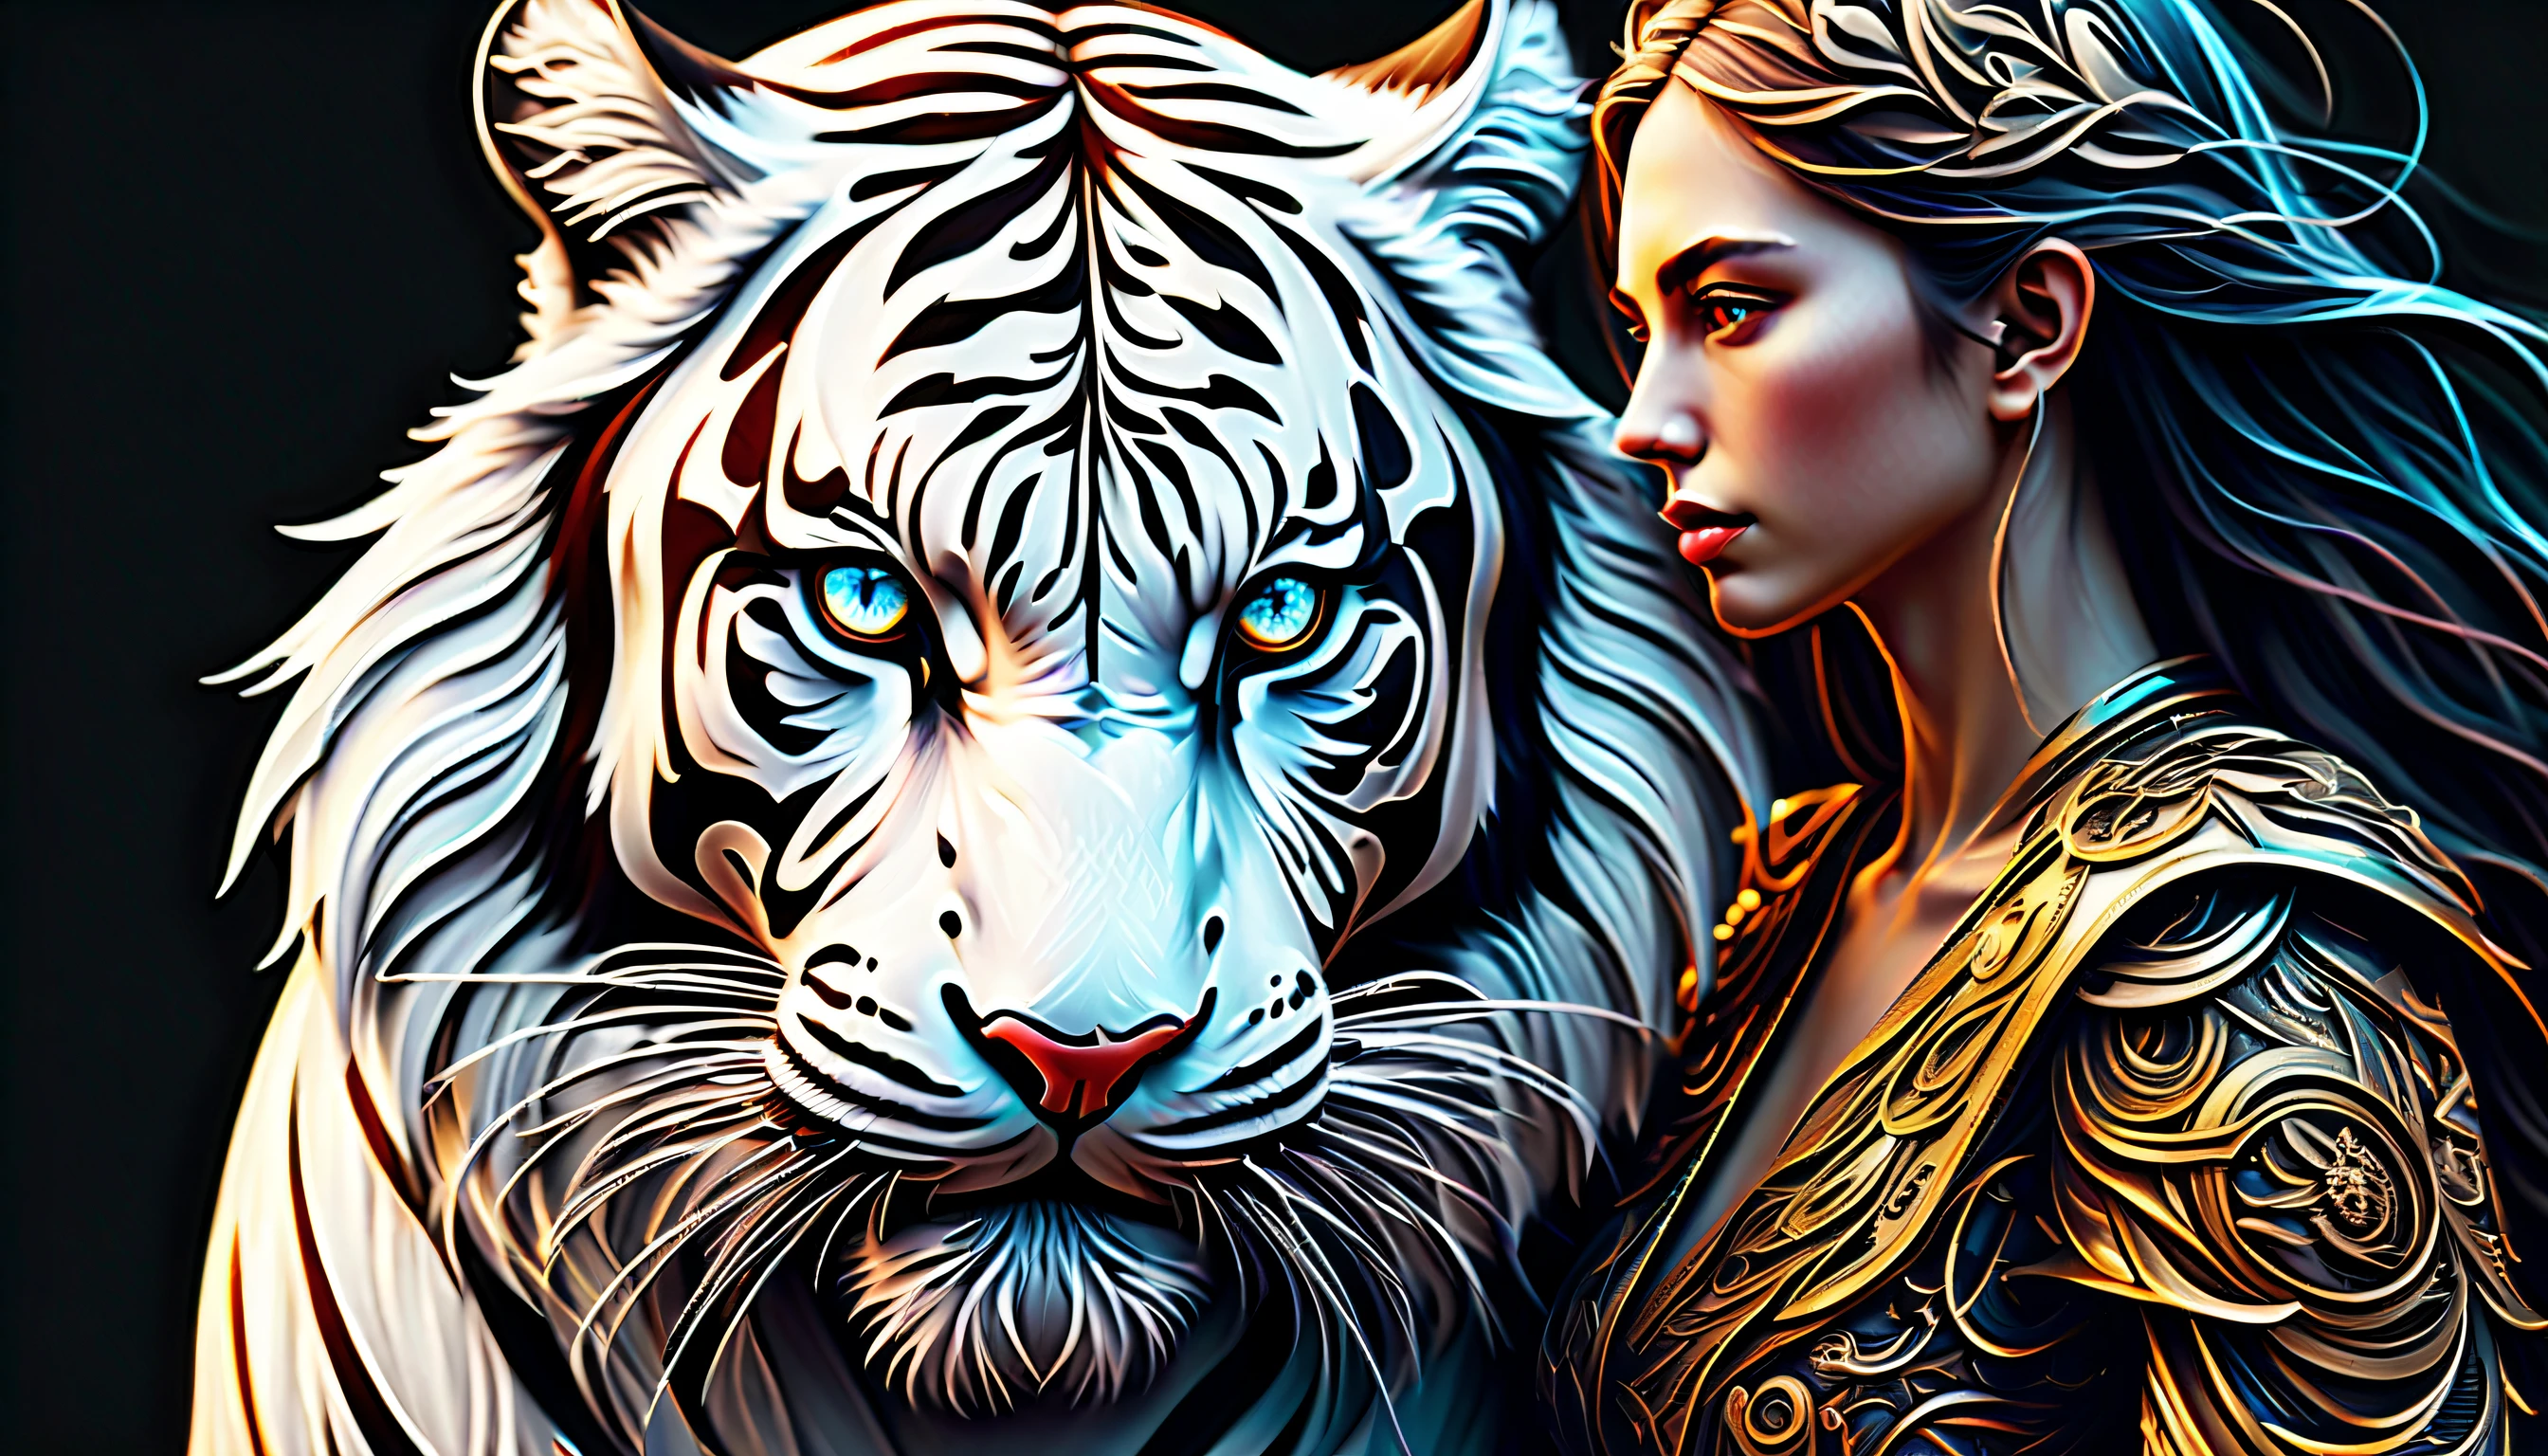 (((two characters intricate detailed digital illustration:1.5))), (((a fierce with powerful white_tiger:1.3))), (((dark fantasy of epic detail illustration:1.3))), (((extremely intricate detail brushstrokes of ride on knight girl with ornament sword:1.4))), (large and slant up eyes:1.1), beauty glow eyes, cinematic angle with still, featuring dynamic clash between atmosphere, rich colors, breathtaking beauty intricate detail, creative and interesting, intricate details and realistic 32k rendering, extremely intricate detailed, imagination breathtaking realm dark fantasy, enchanting of dark fantasy environment, surrealism background, intricate details and flawless quality, high contrast masterpiece, delivering a visually stunning, dark fantasy and fantasia harmony, exquisite high-definition drawing, limitlessly high resolution, (sharp resolution:1.1), (((all captured in sharp focus:1.2))), (((rendered in stunning 32k resolution:1.4))), (((beautiful detail glow:1.3))), impeccable quality, (((highest quality:1.4))), highly quality, best quality, (((extremely insane detail:1.4))),